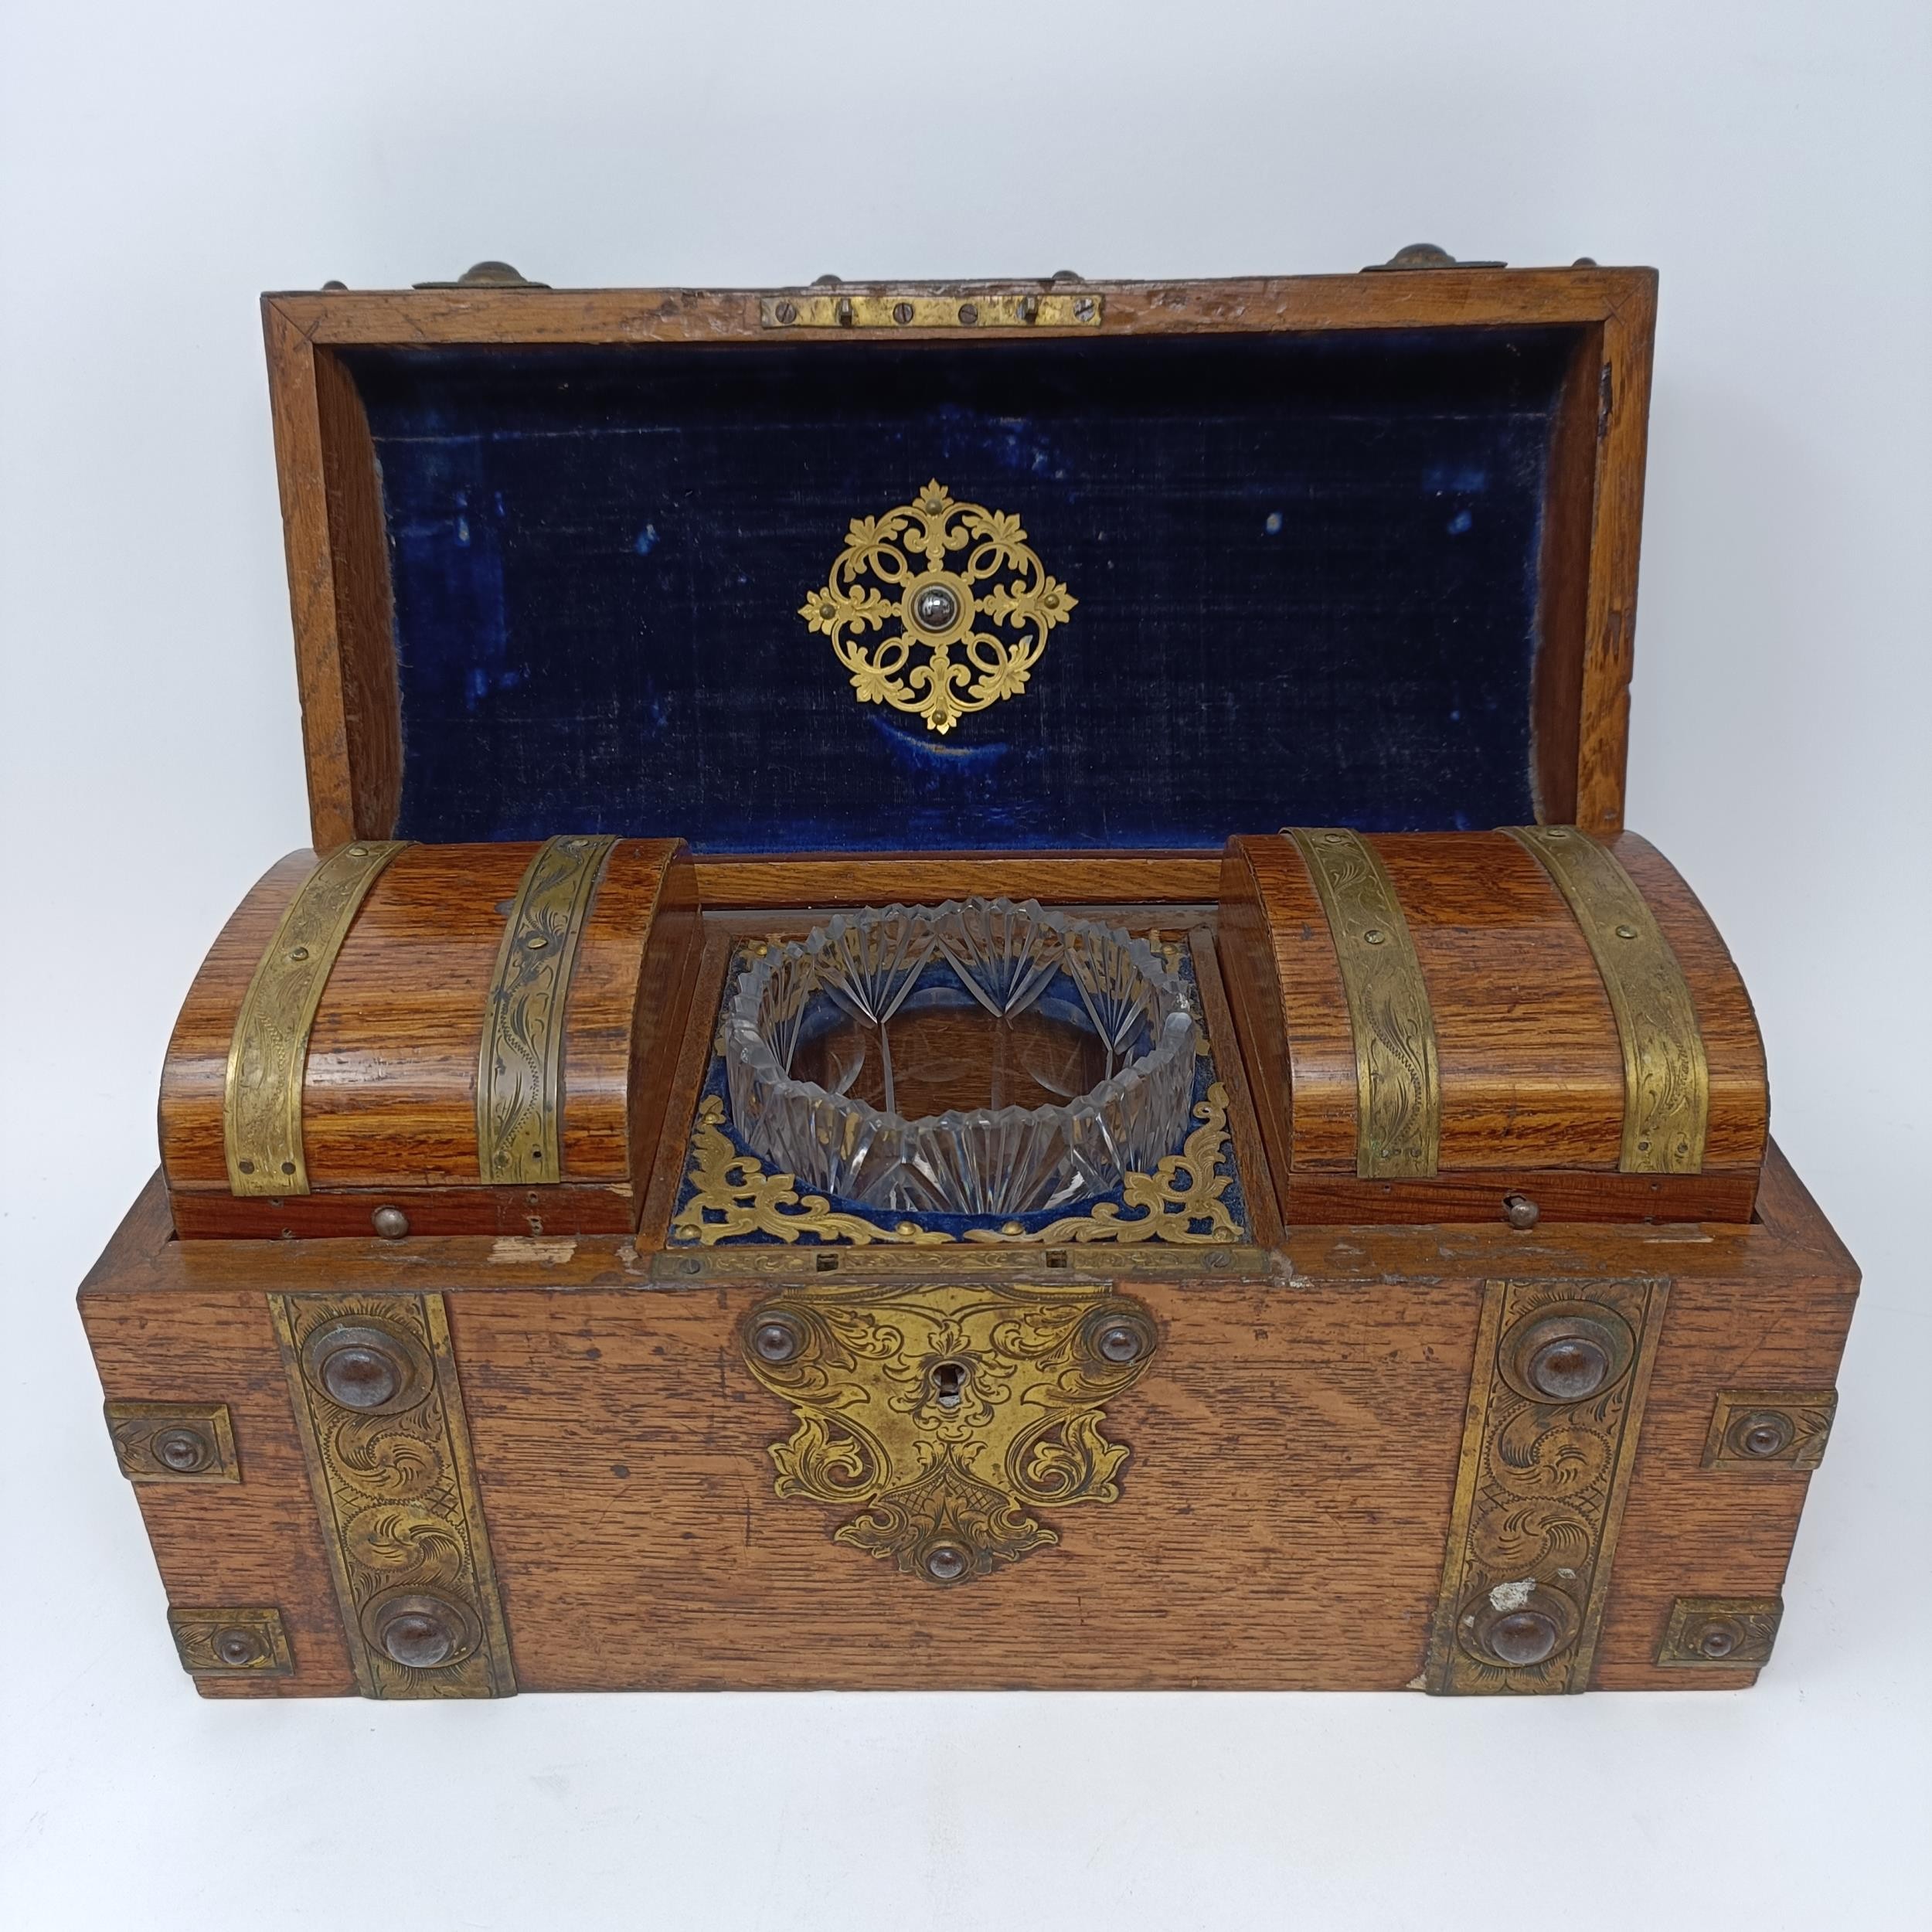 *** Withdrawn***A 19th century oak and brass bound tea caddy, with a hinge lid to reveal